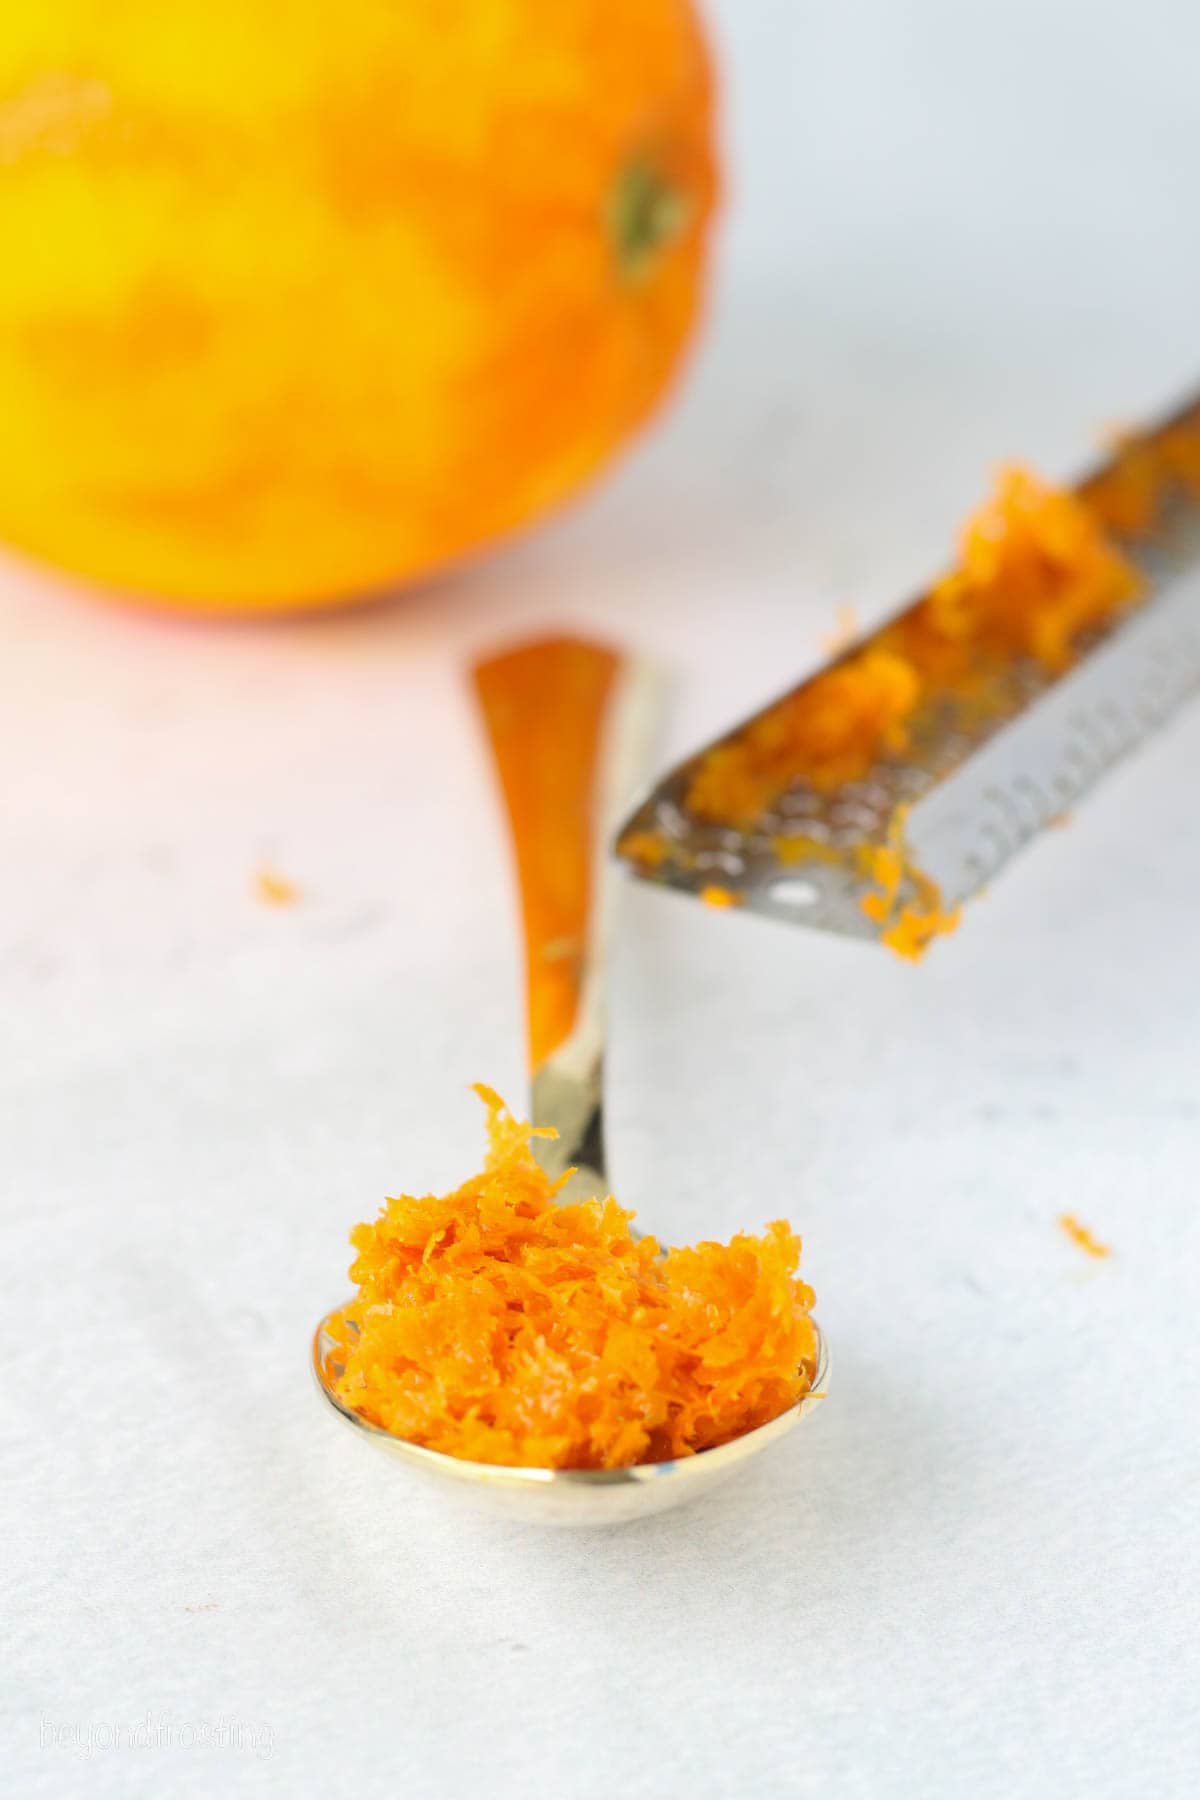 A spoonful of fresh orange zest next to a citrus zester on a countertop, with a zested orange in the background.